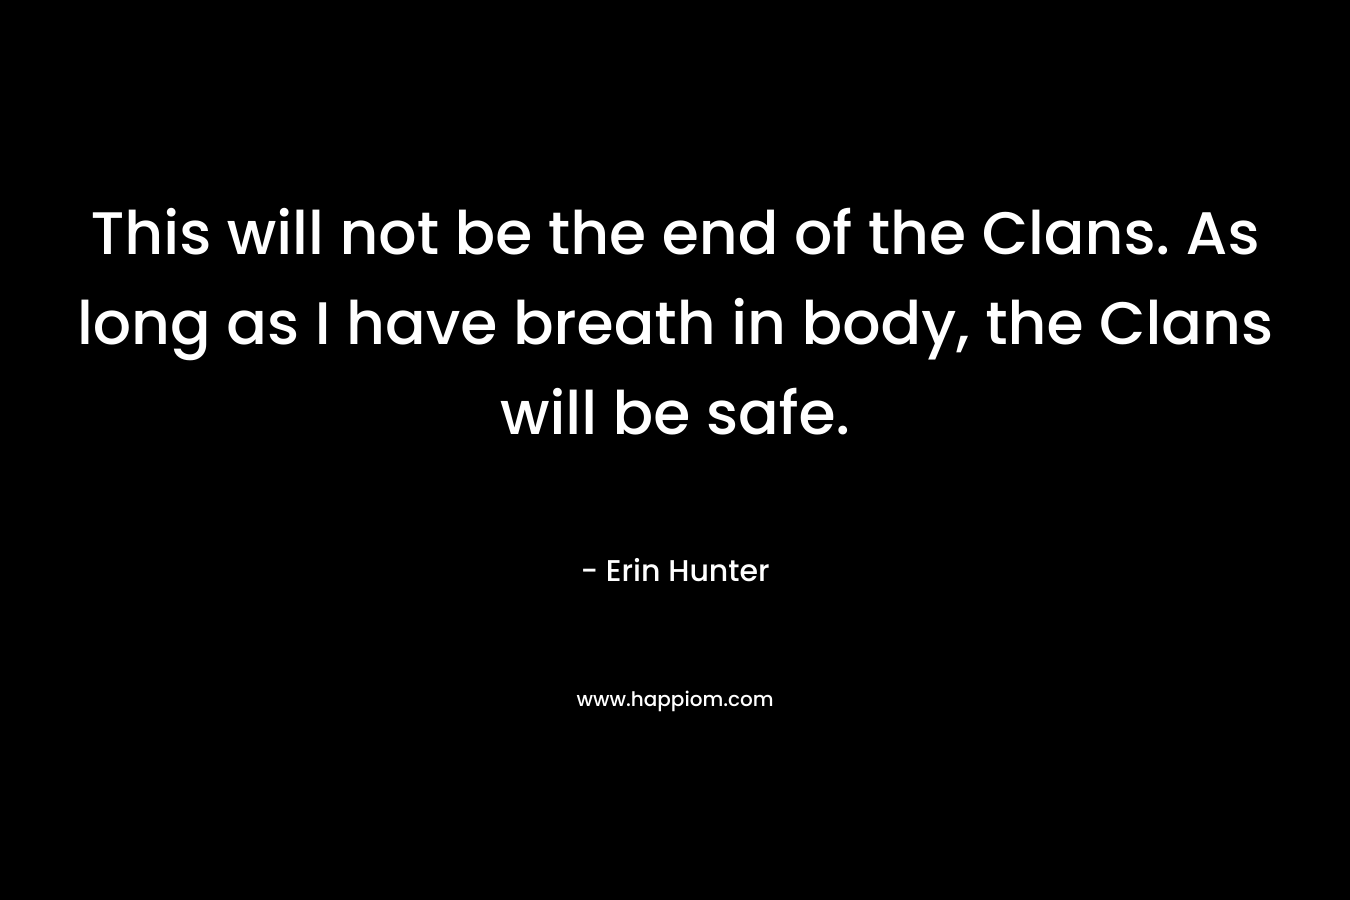 This will not be the end of the Clans. As long as I have breath in body, the Clans will be safe.